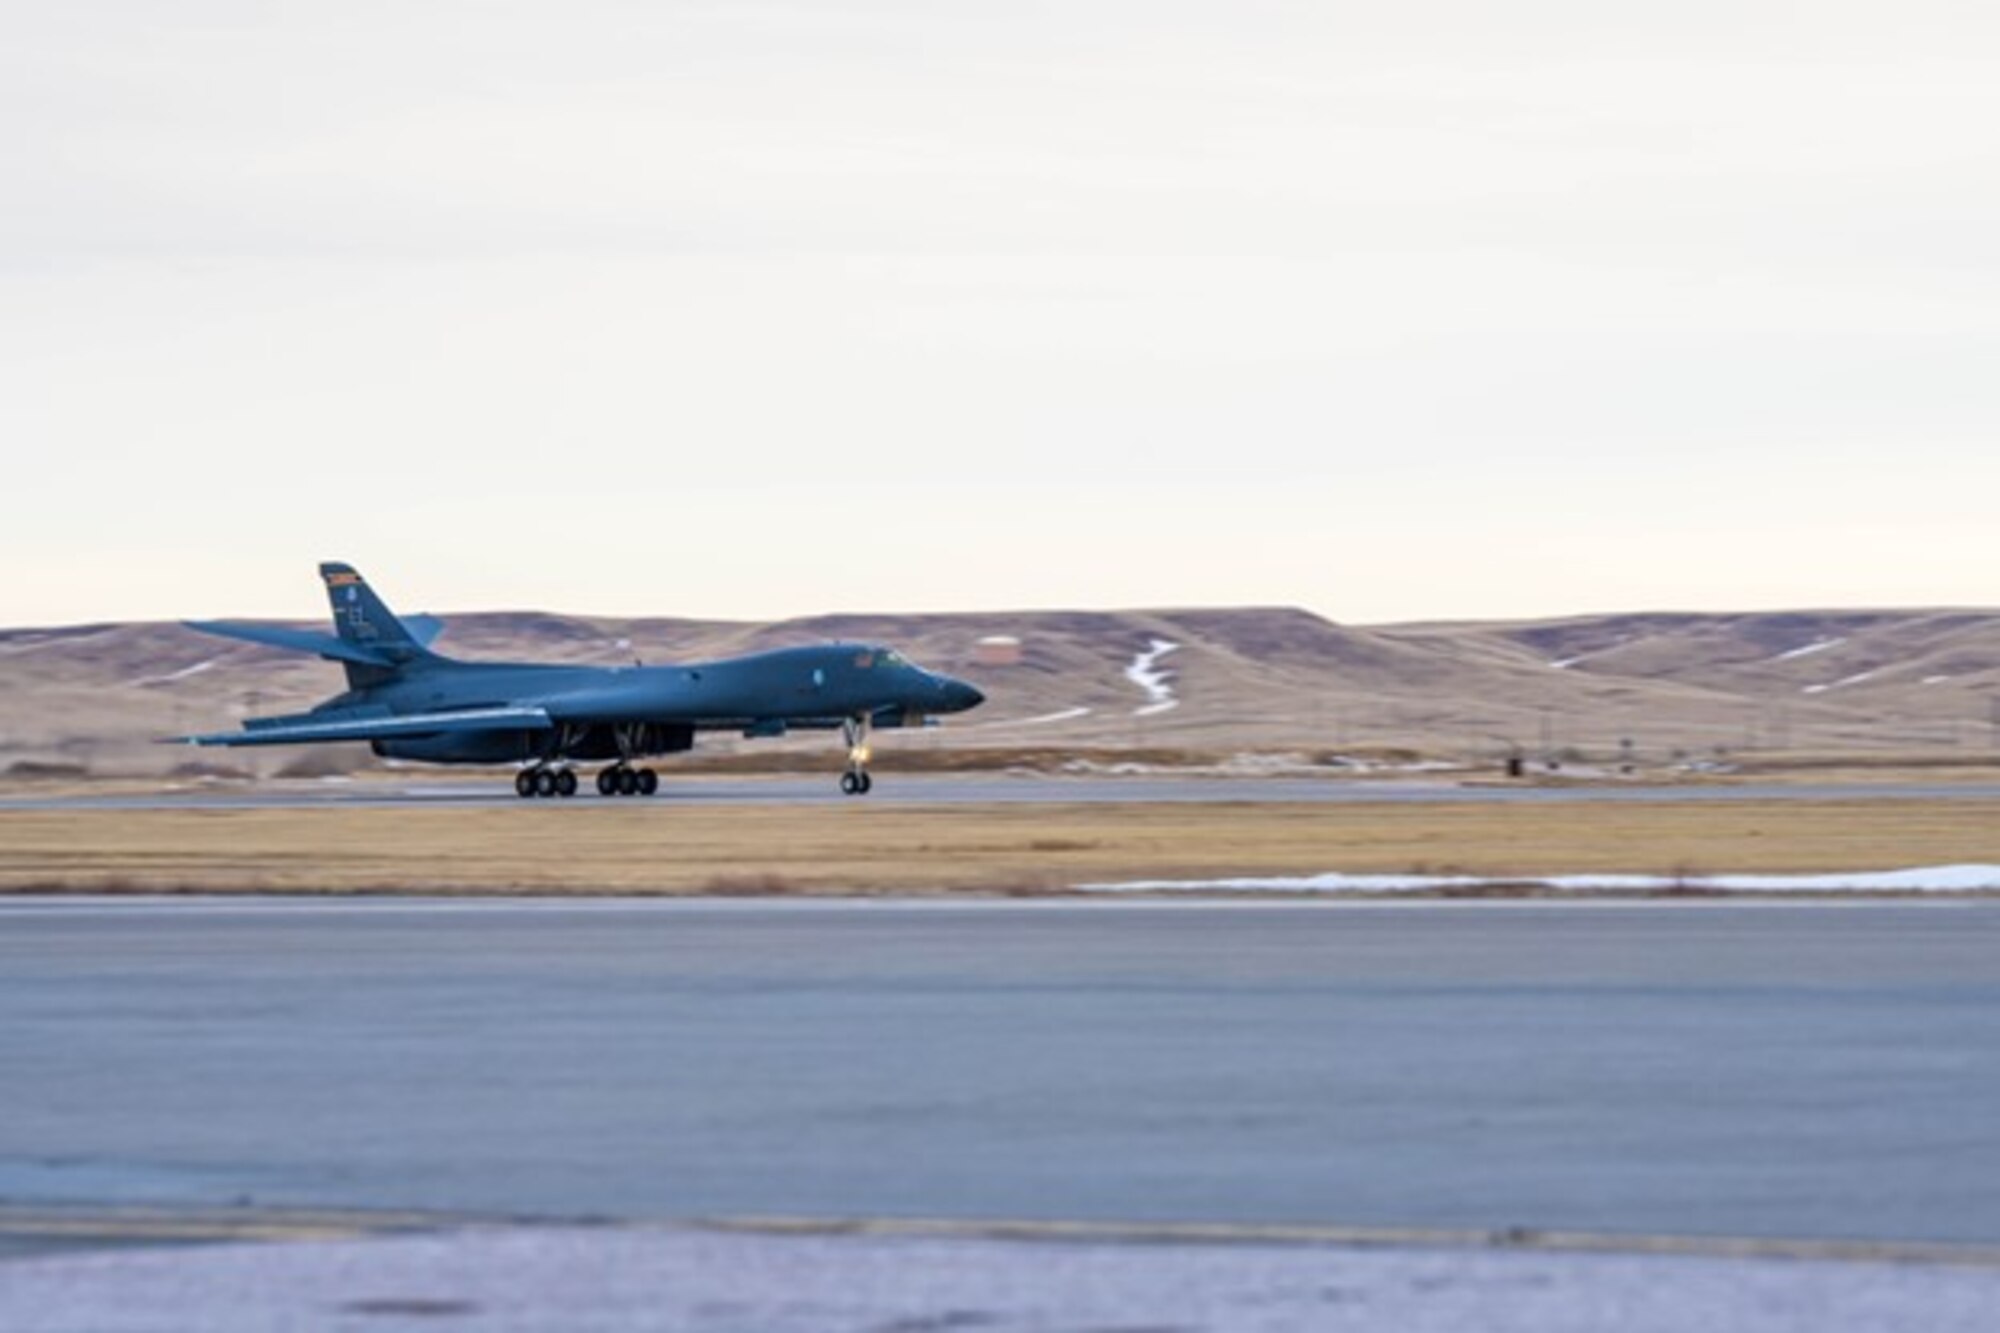 A U.S. Air Force B-1B Lancer, assigned to the 37th Bomb Squadron, lands at Ellsworth Air Force Base, South Dakota, after completing a long-duration CONUS-to-CONUS (C2C) mission to the Indo-Pacific  Jan. 10, 2023. Together with our Allies and partners, the United States is dedicated to maintaining a region comprised of nations that adhere to international law. (U.S. Air Force photo by A1C Josephine Pepin)